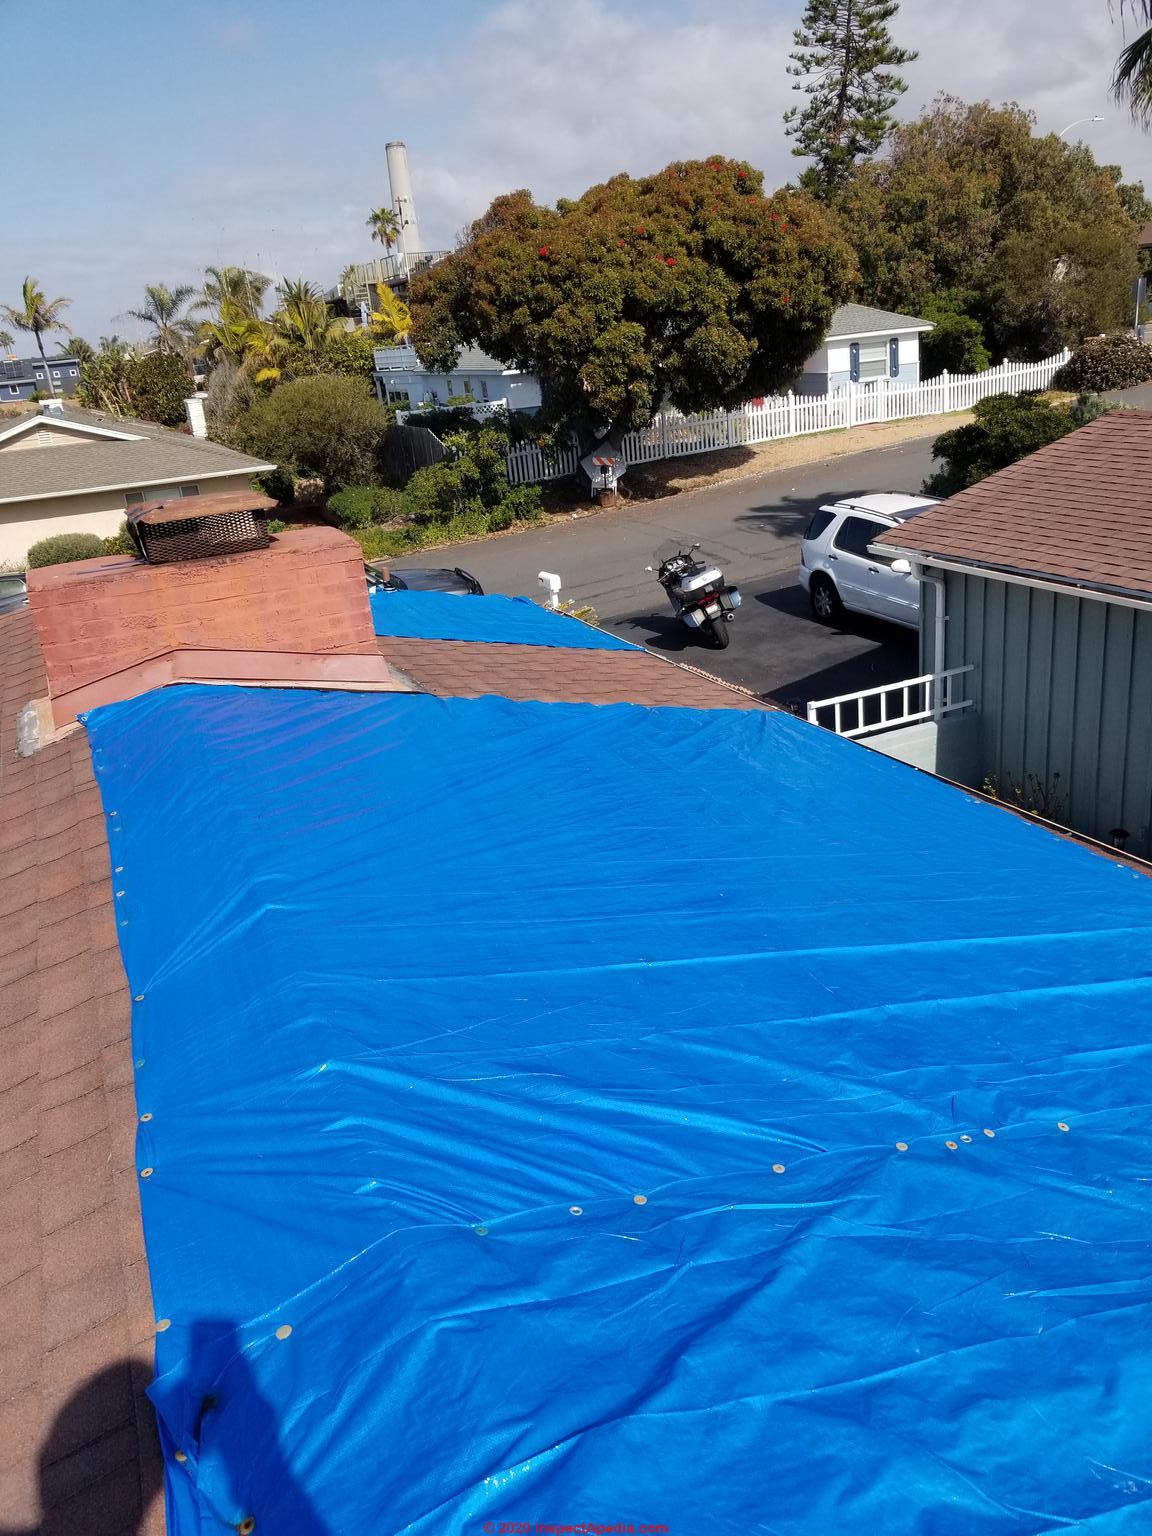 Resolving Problems With Roofing Jobs